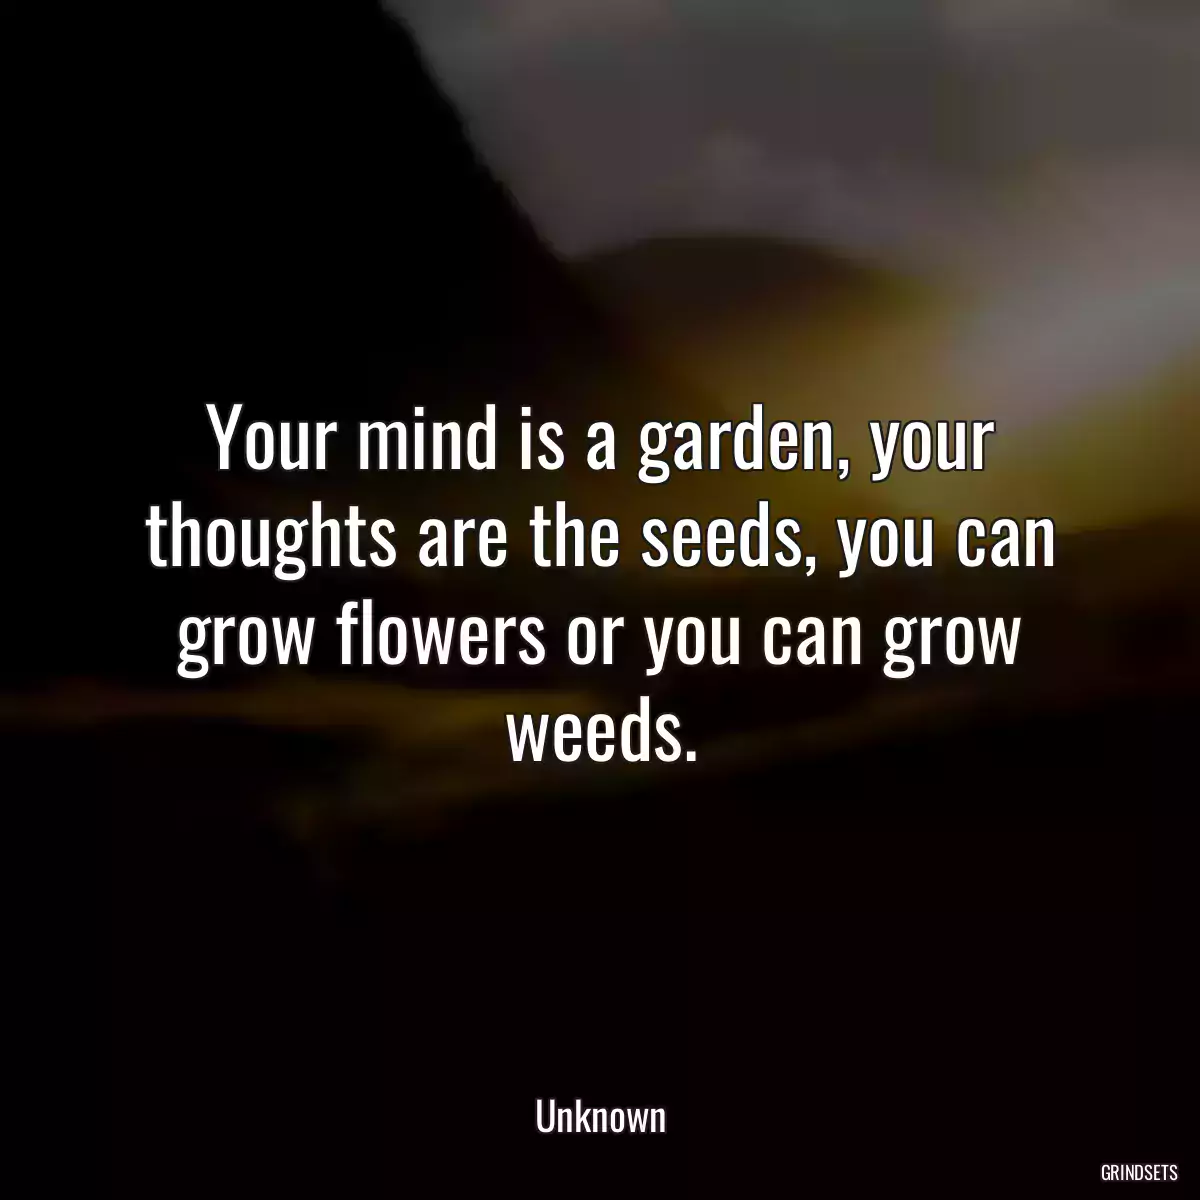 Your mind is a garden, your thoughts are the seeds, you can grow flowers or you can grow weeds.